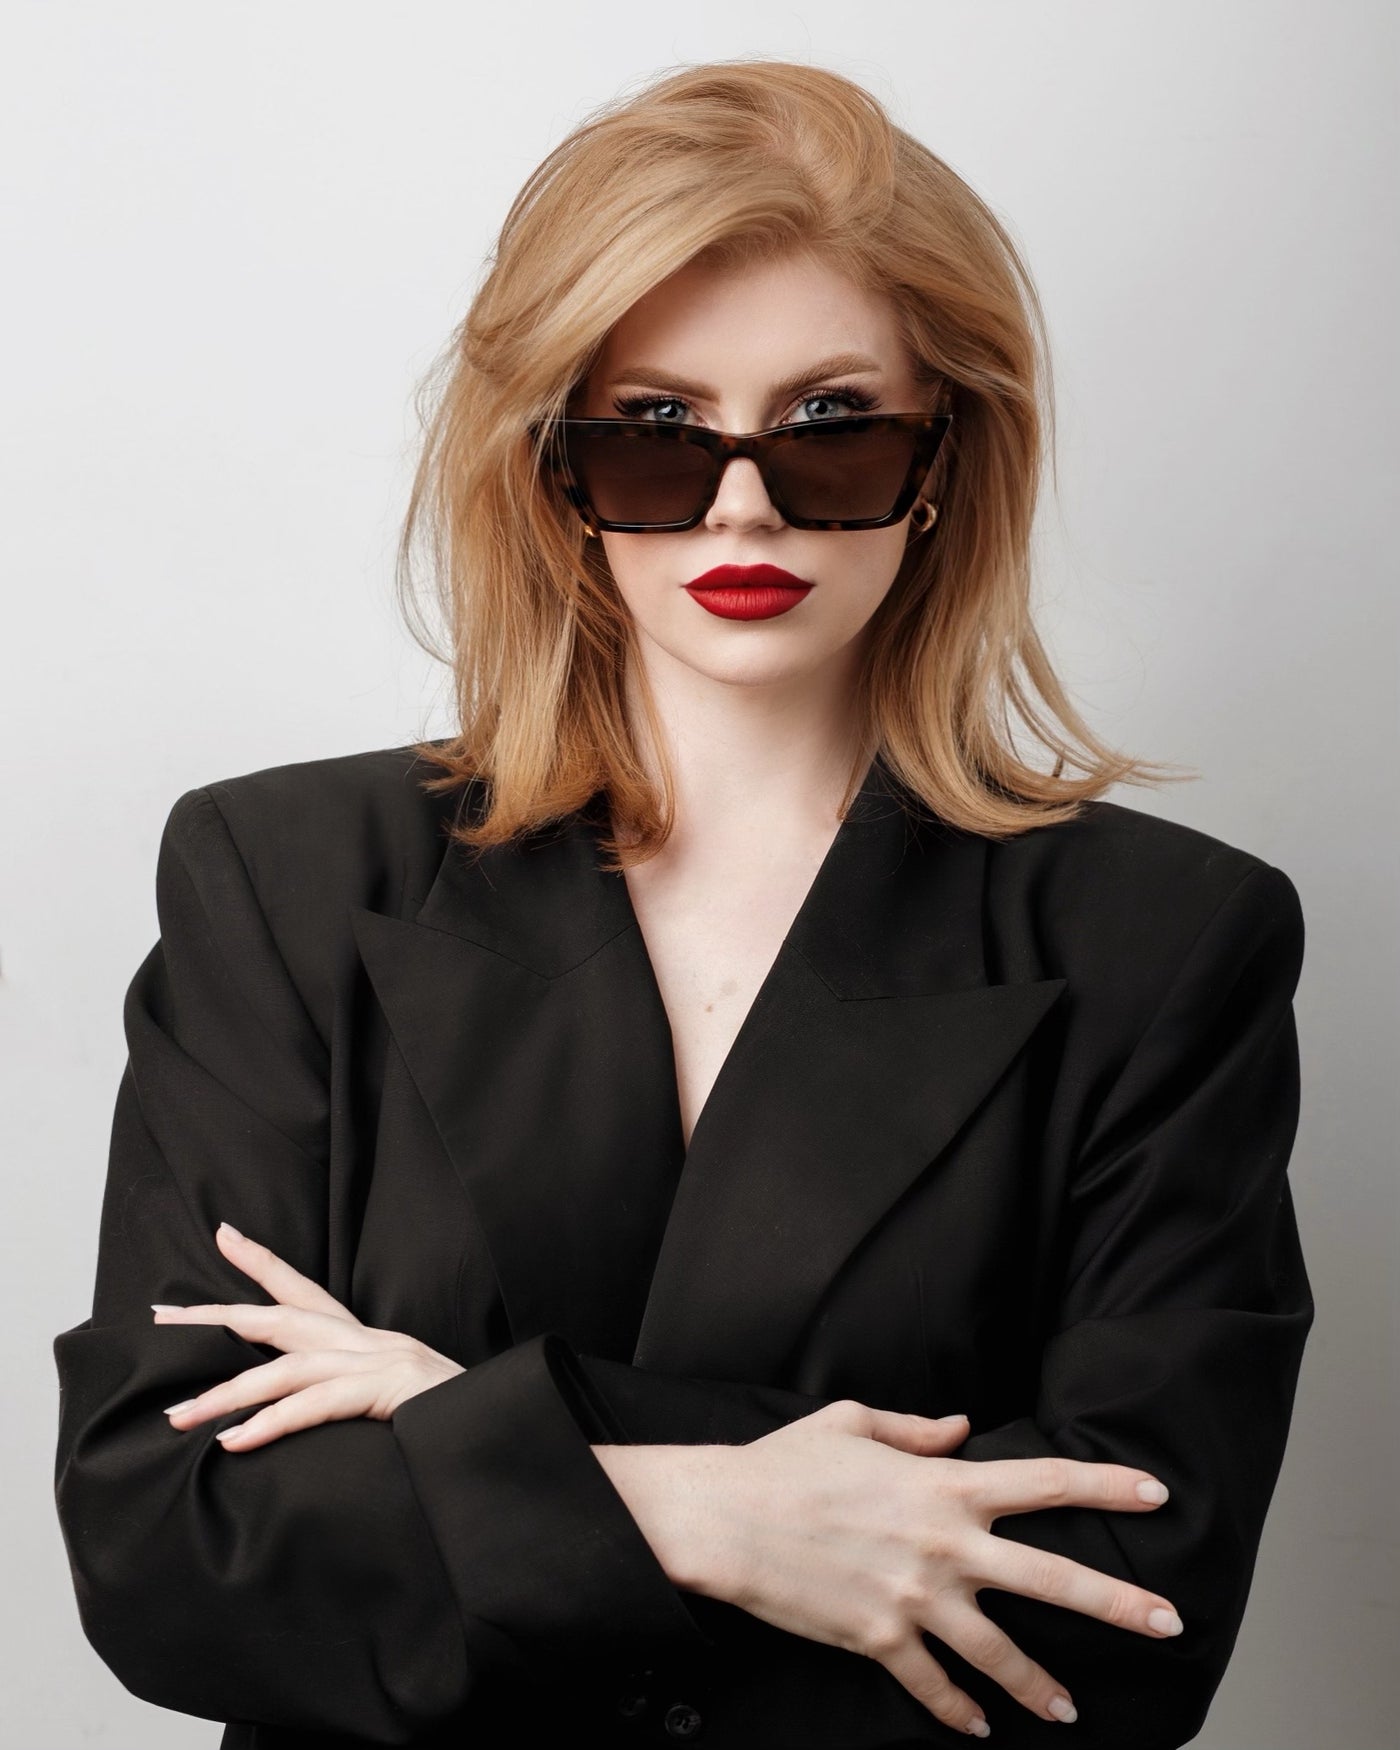 sunglasses, Trapezoid silhouette, trap silhouette, Tort frame, smokey brown lens, wide face petite, midi sunglasses, slightly wider than standard - shown as worn by female with orange-y red hair, dark red lipstick, black blazer, gold jewelry, she is looking toward the camera, arms crossed with hands on arms, glasses sitting down the bridge of her nose so you can see her eyes